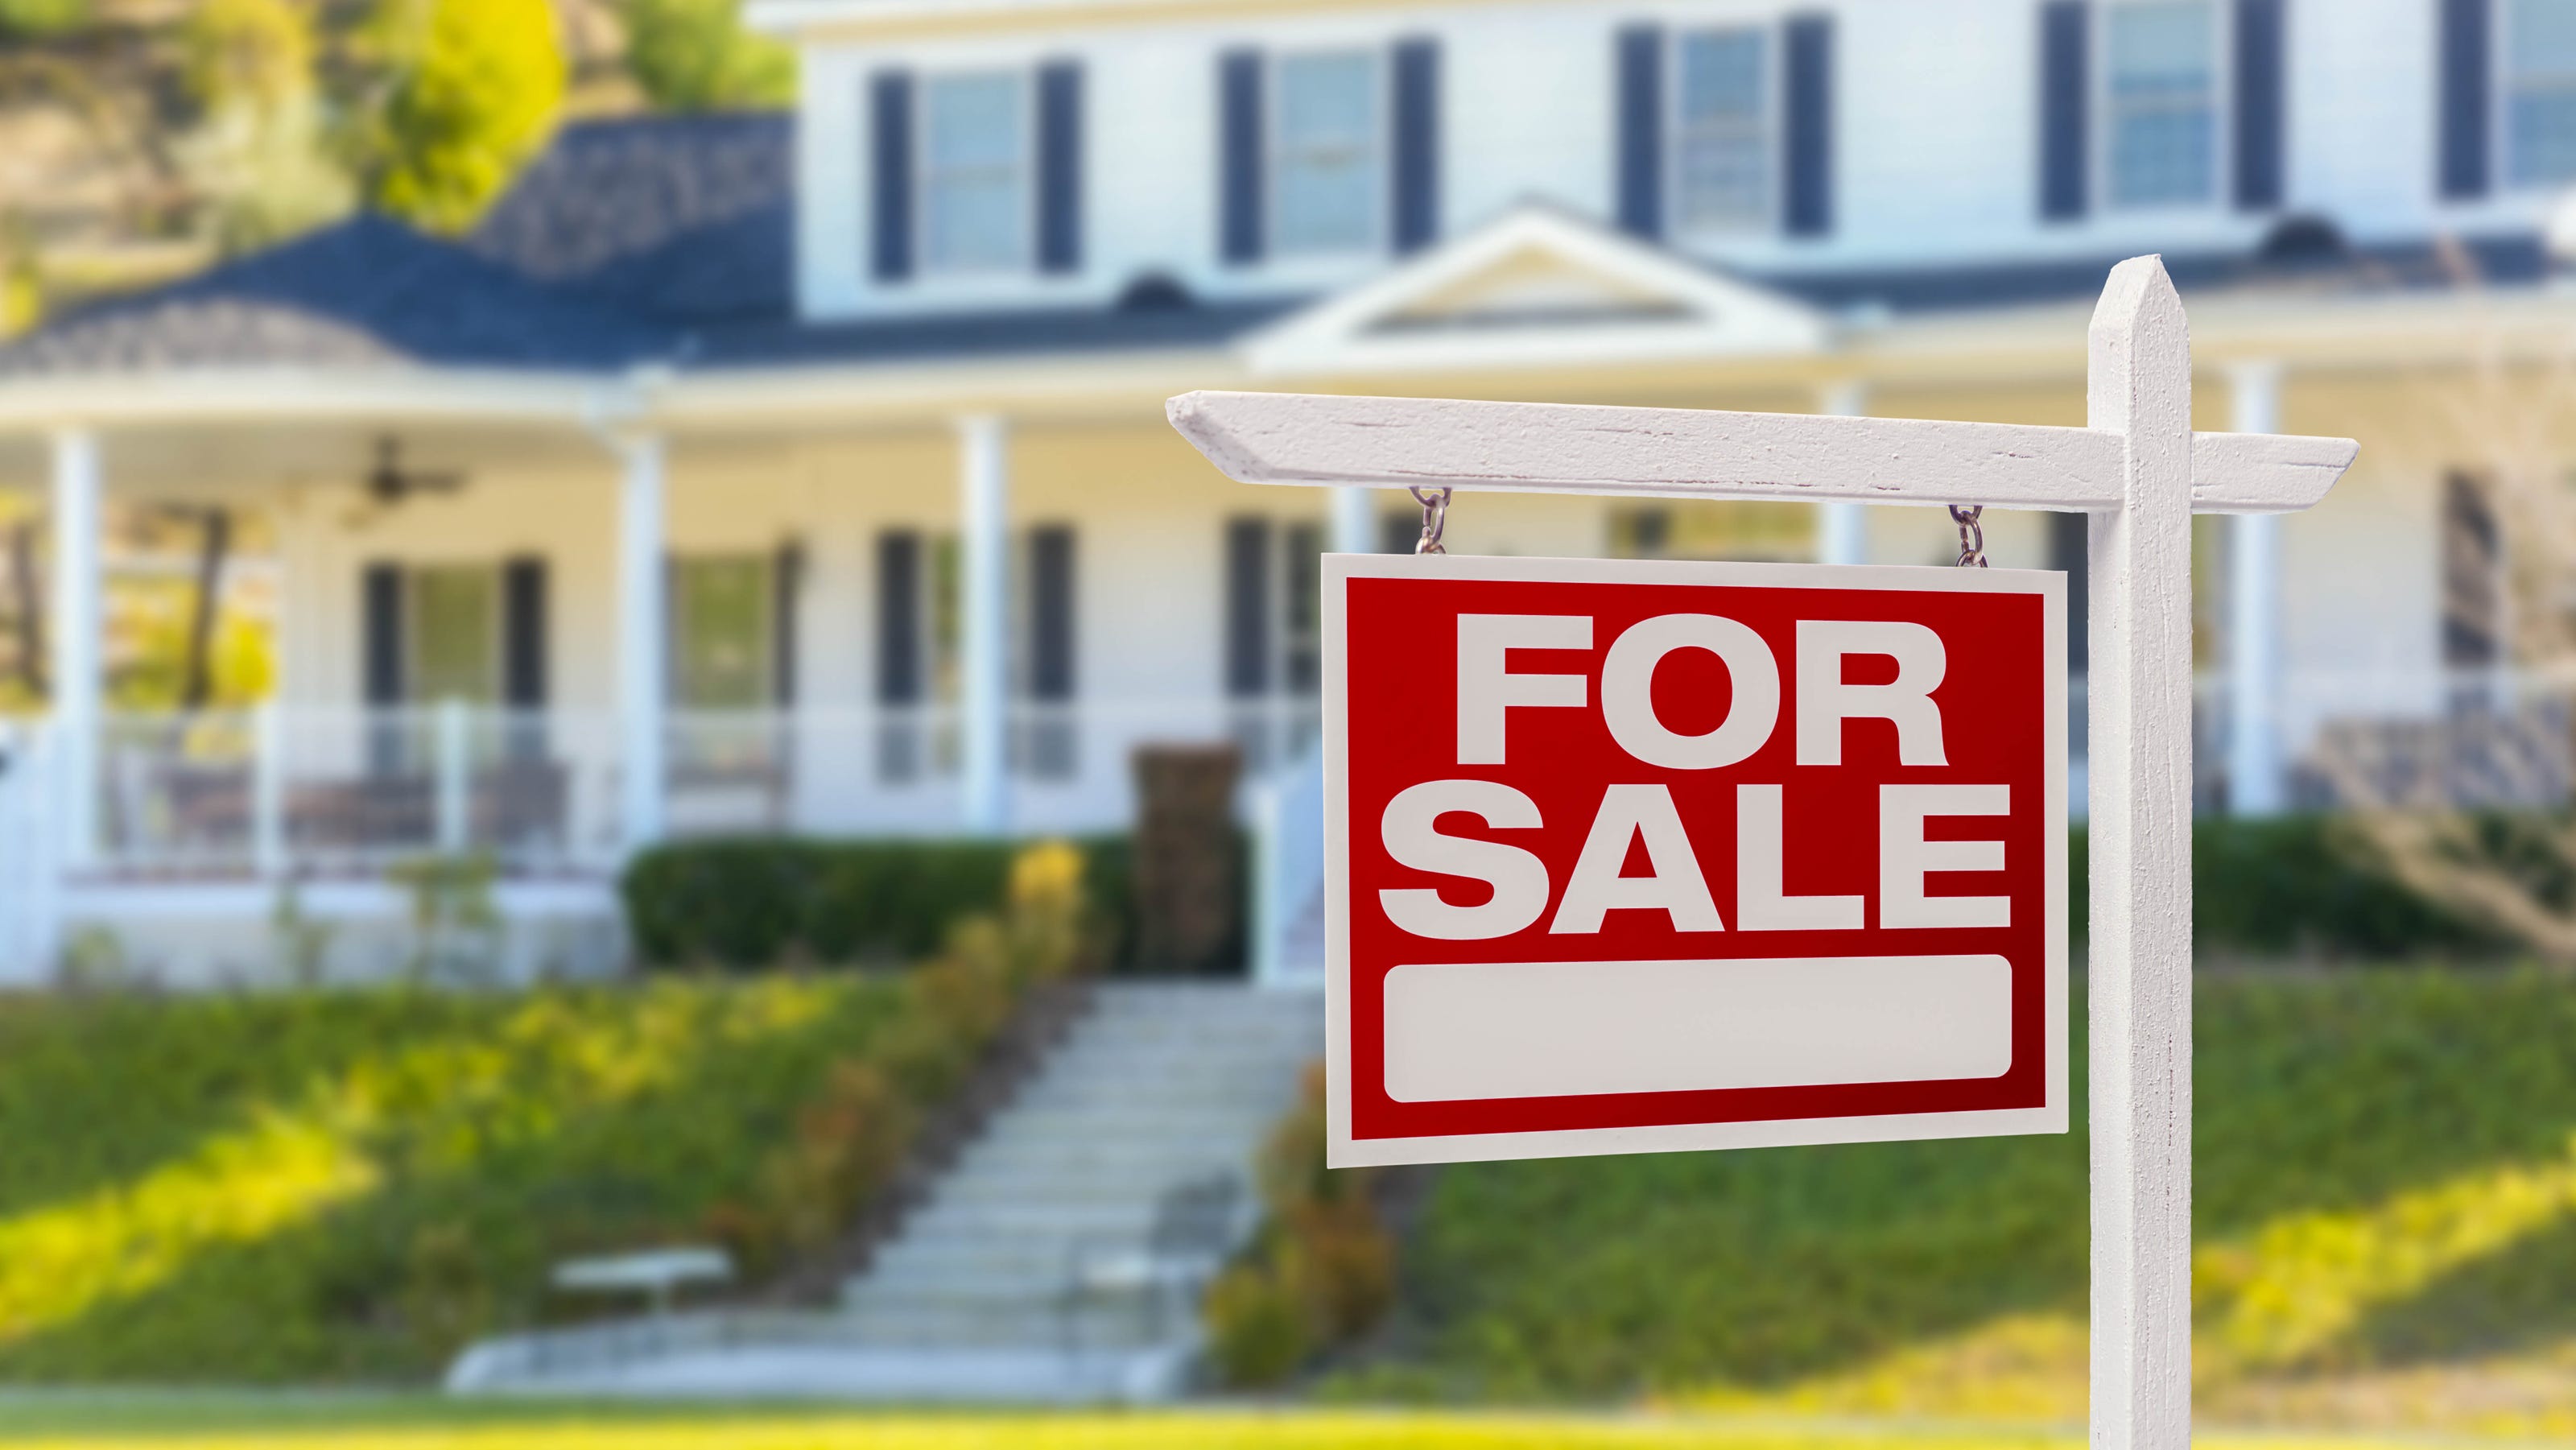 Real estate sales for Portage County, Ohio for July 2022